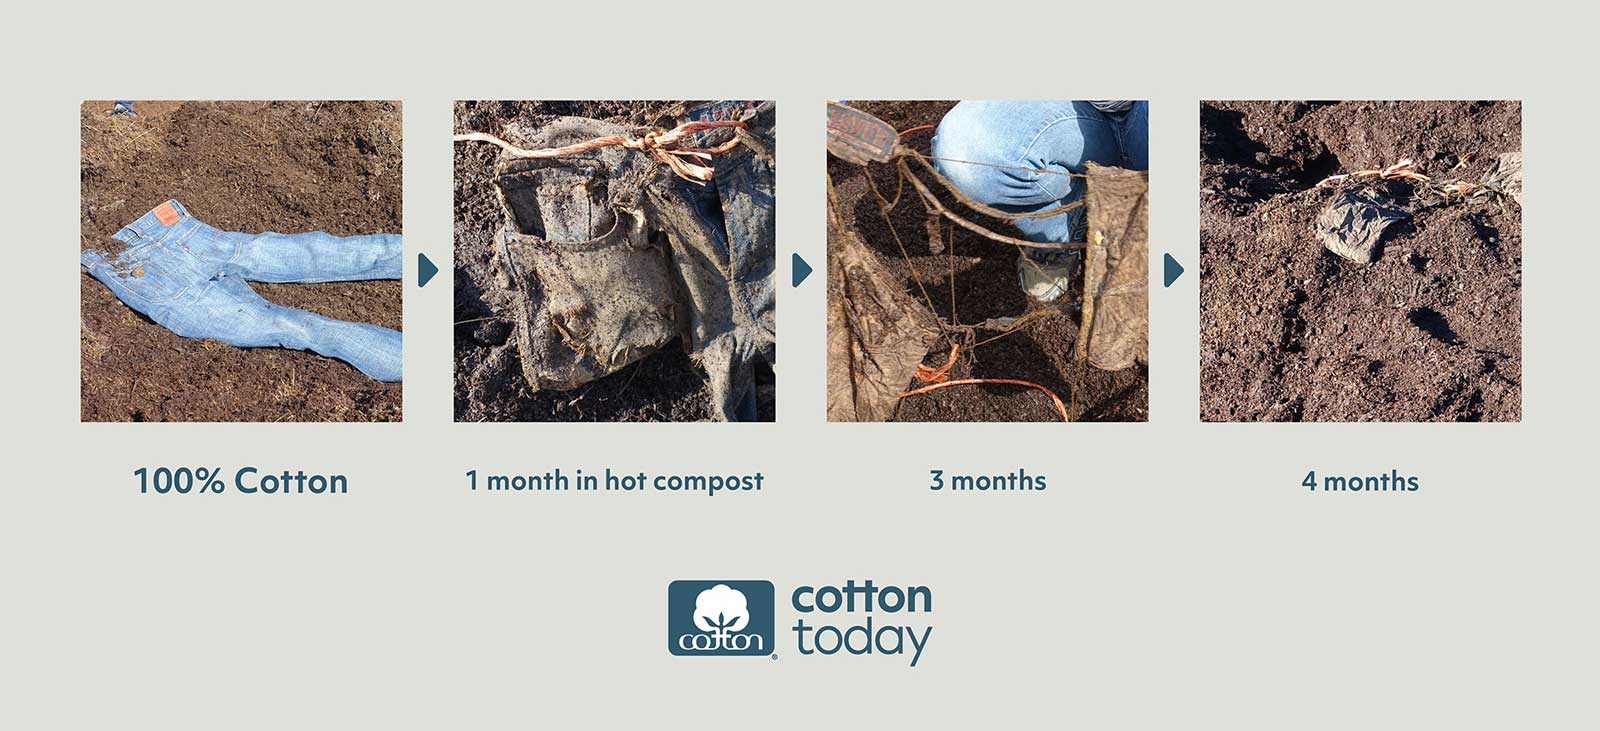 100% cotton decomposes over 4 months